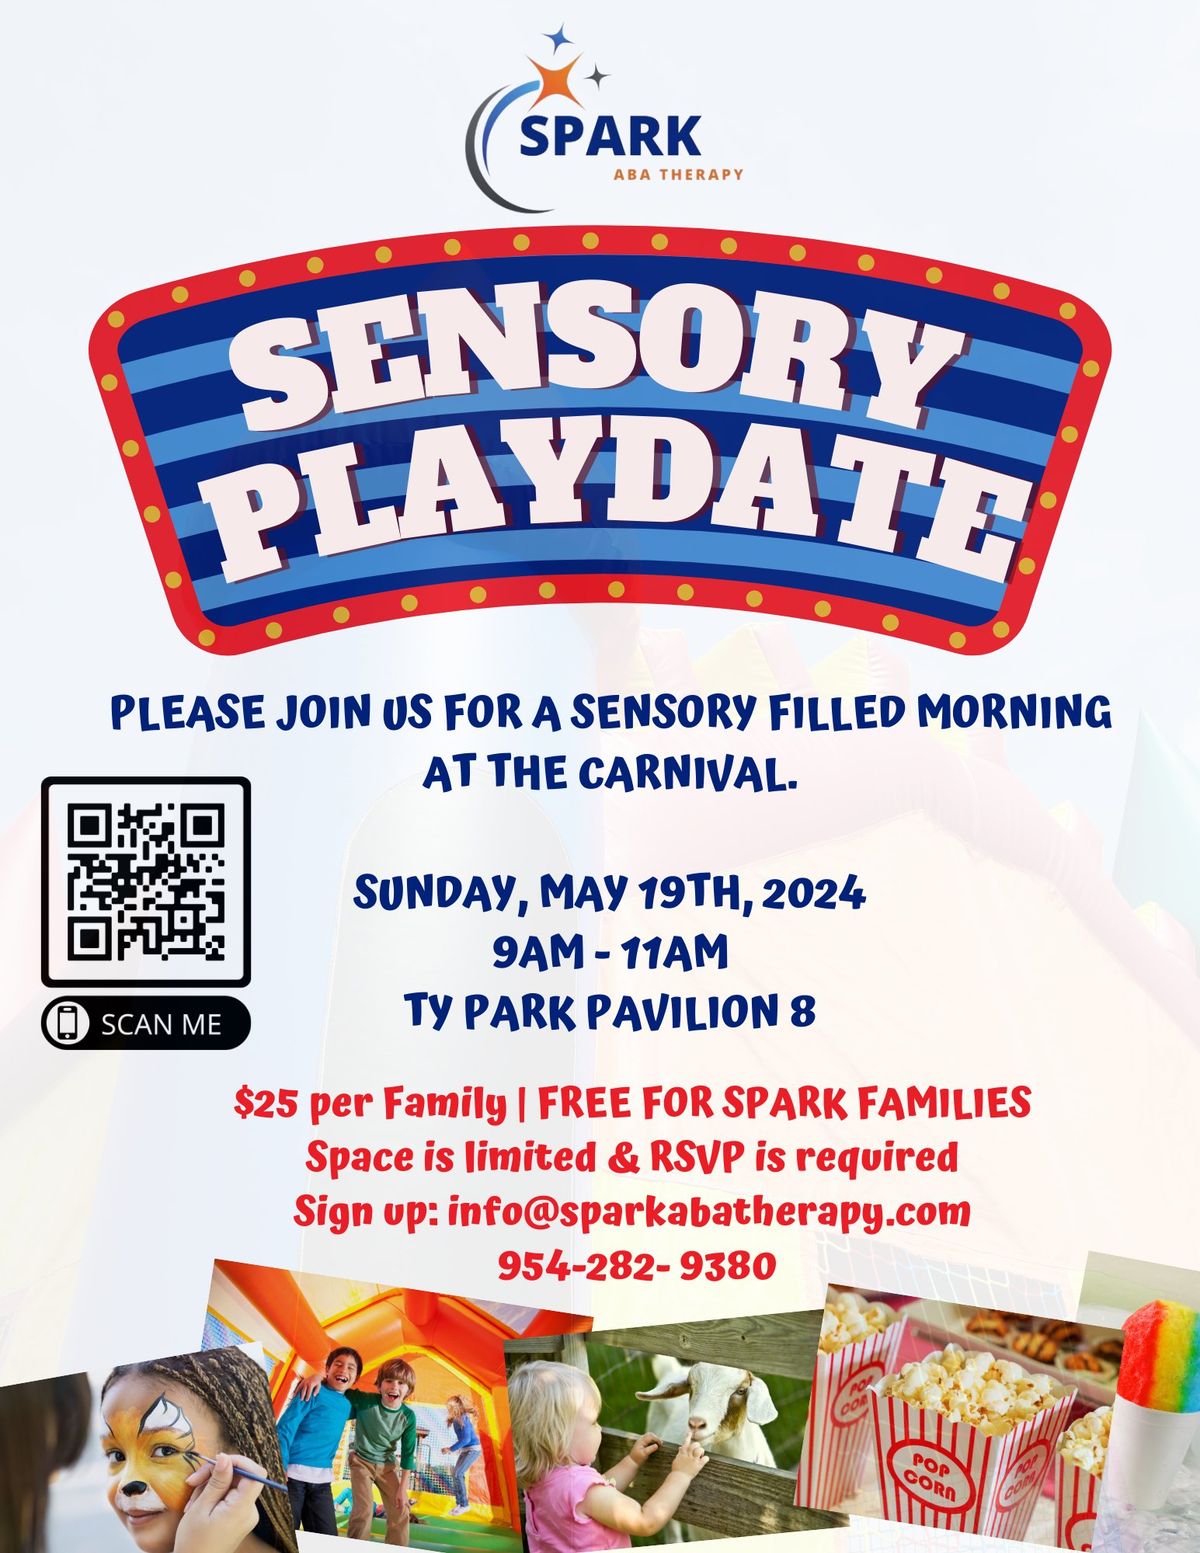 Sensory Playdate - Mini Carnival at TY Park in Hollywood, FL